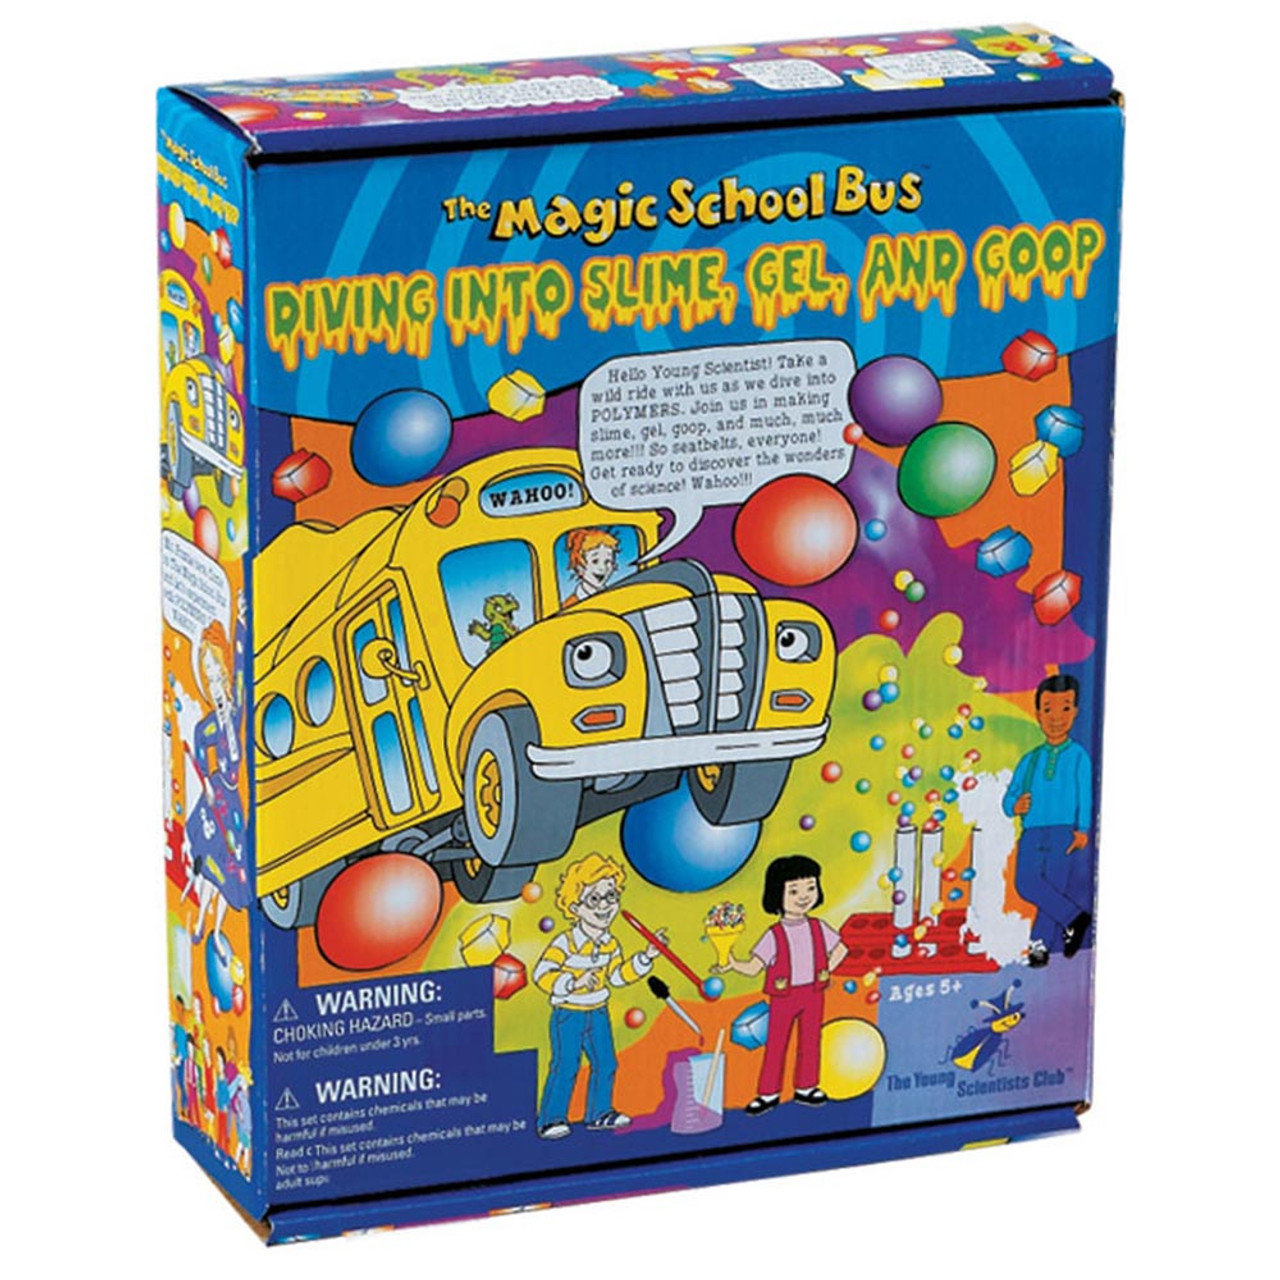  Science Kit for Kids Age 5-7 - 65 Science Experiments Gift Set  : Toys & Games